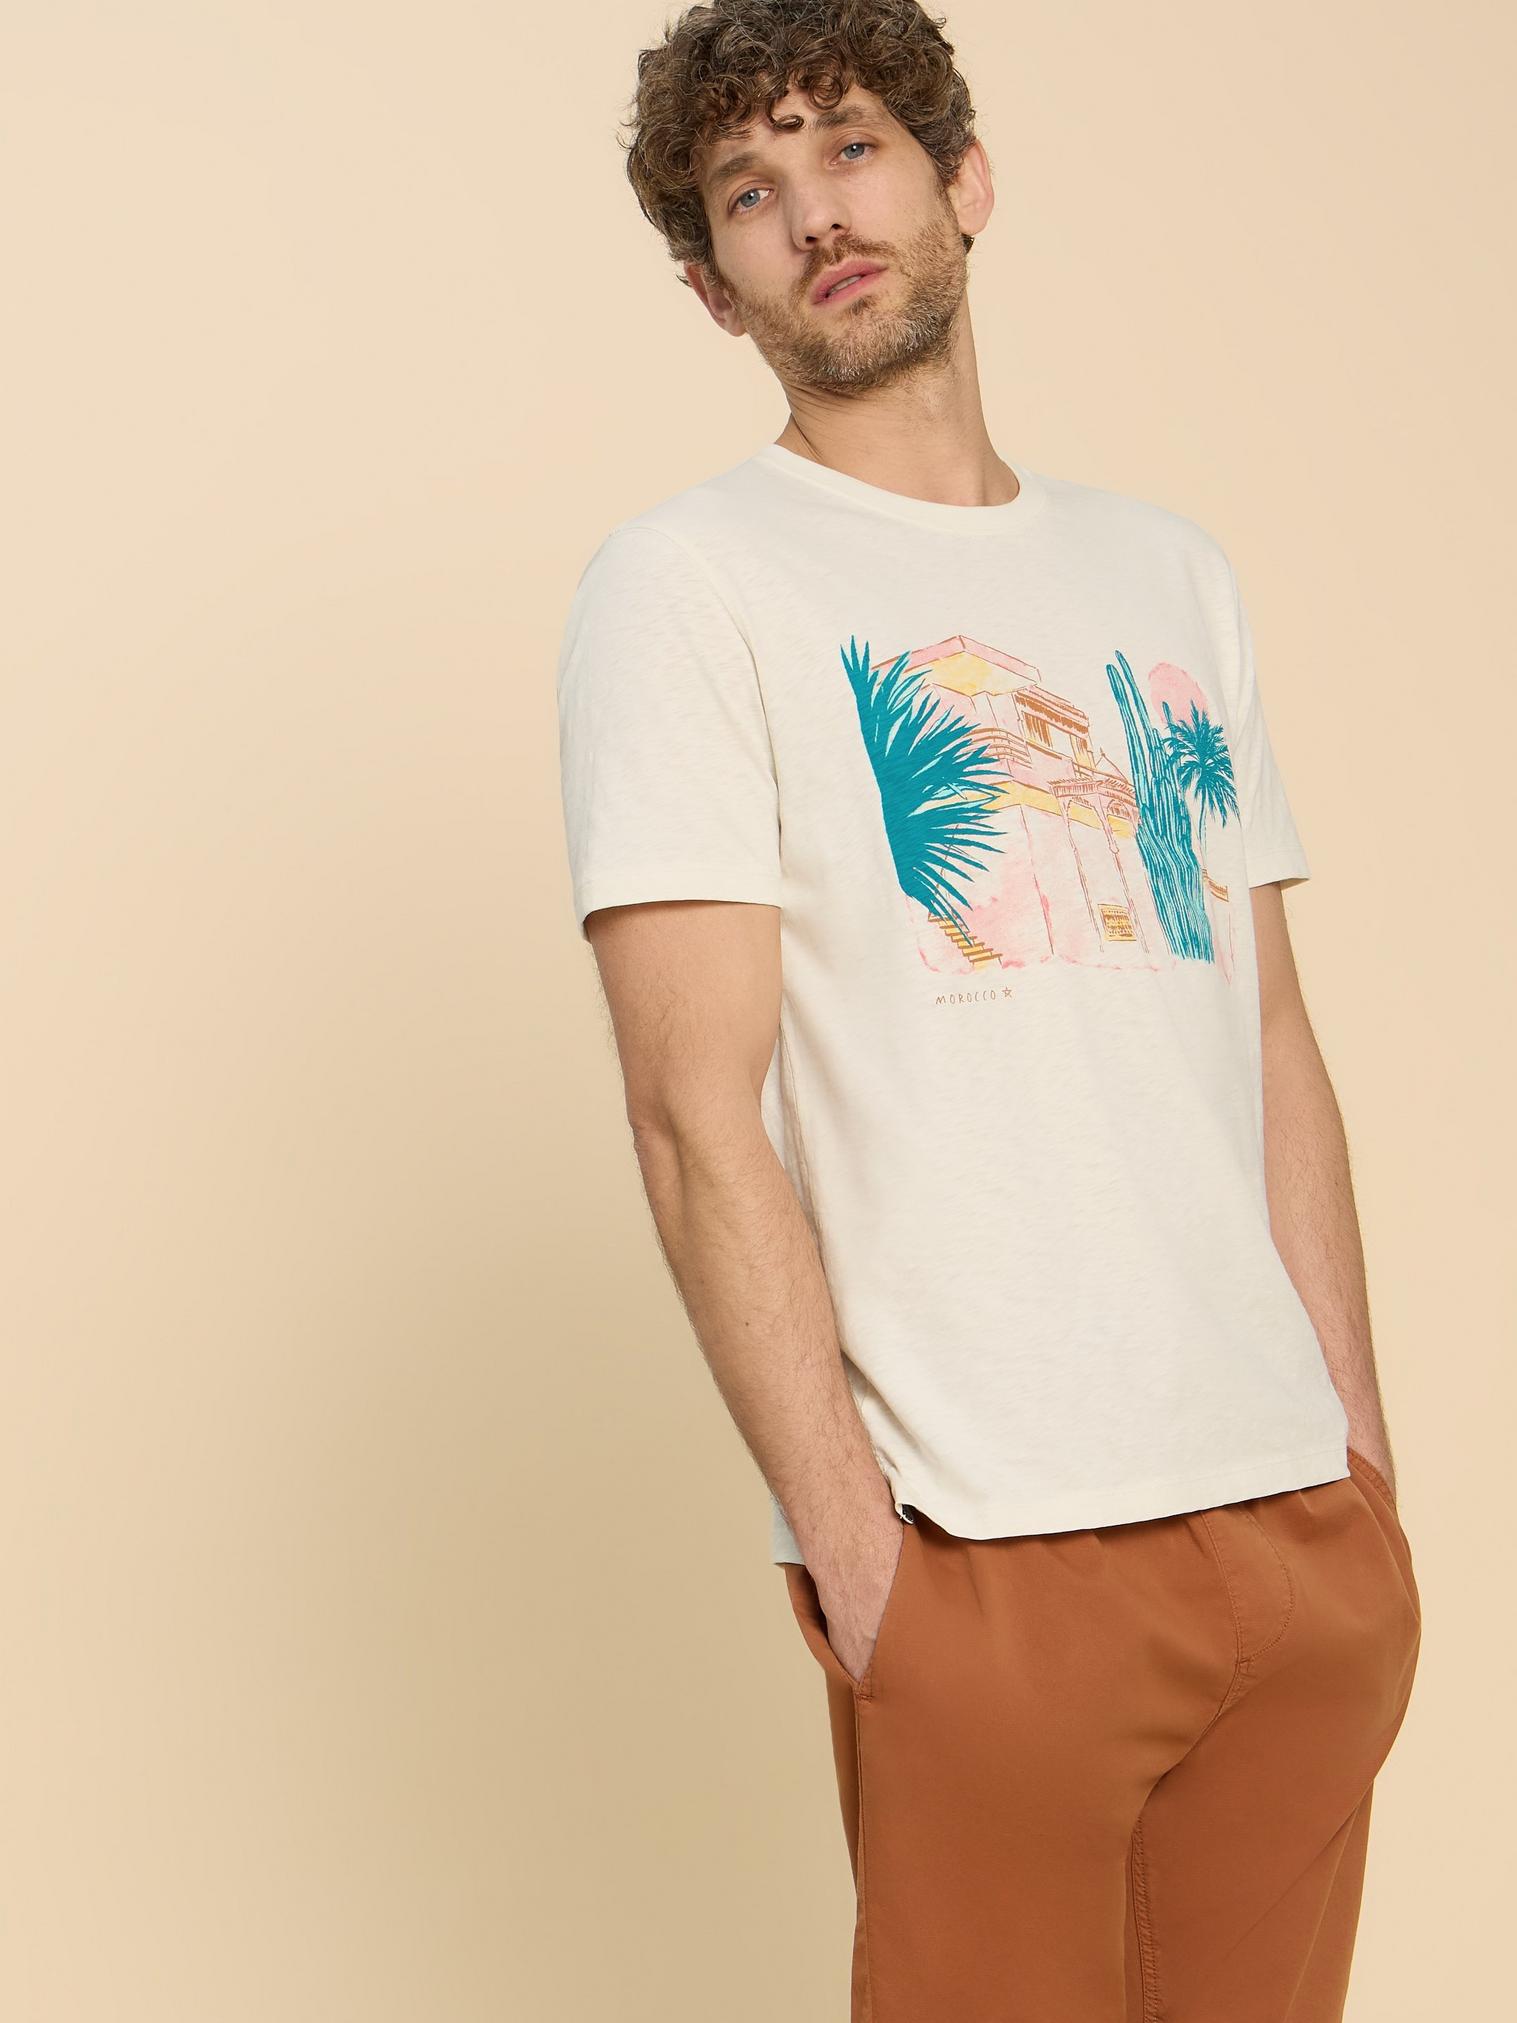 Morocco Graphic Tee in WHITE PR - LIFESTYLE